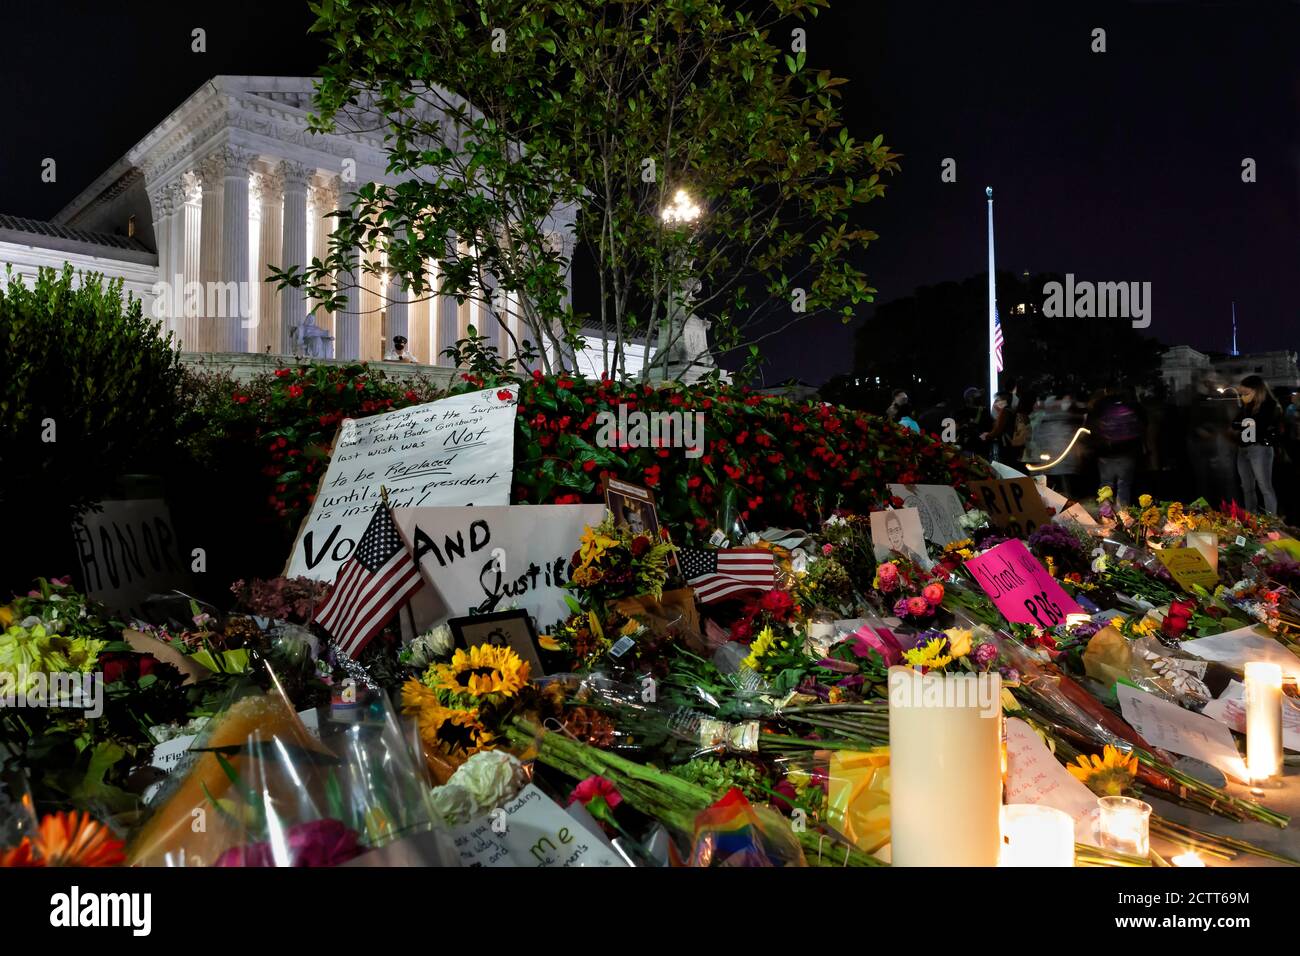 Flowers, candles, and signs left in front of the United States Supreme Court building in remembrance of Justice Ruth Bader Ginsburg, Washington, DC Stock Photo